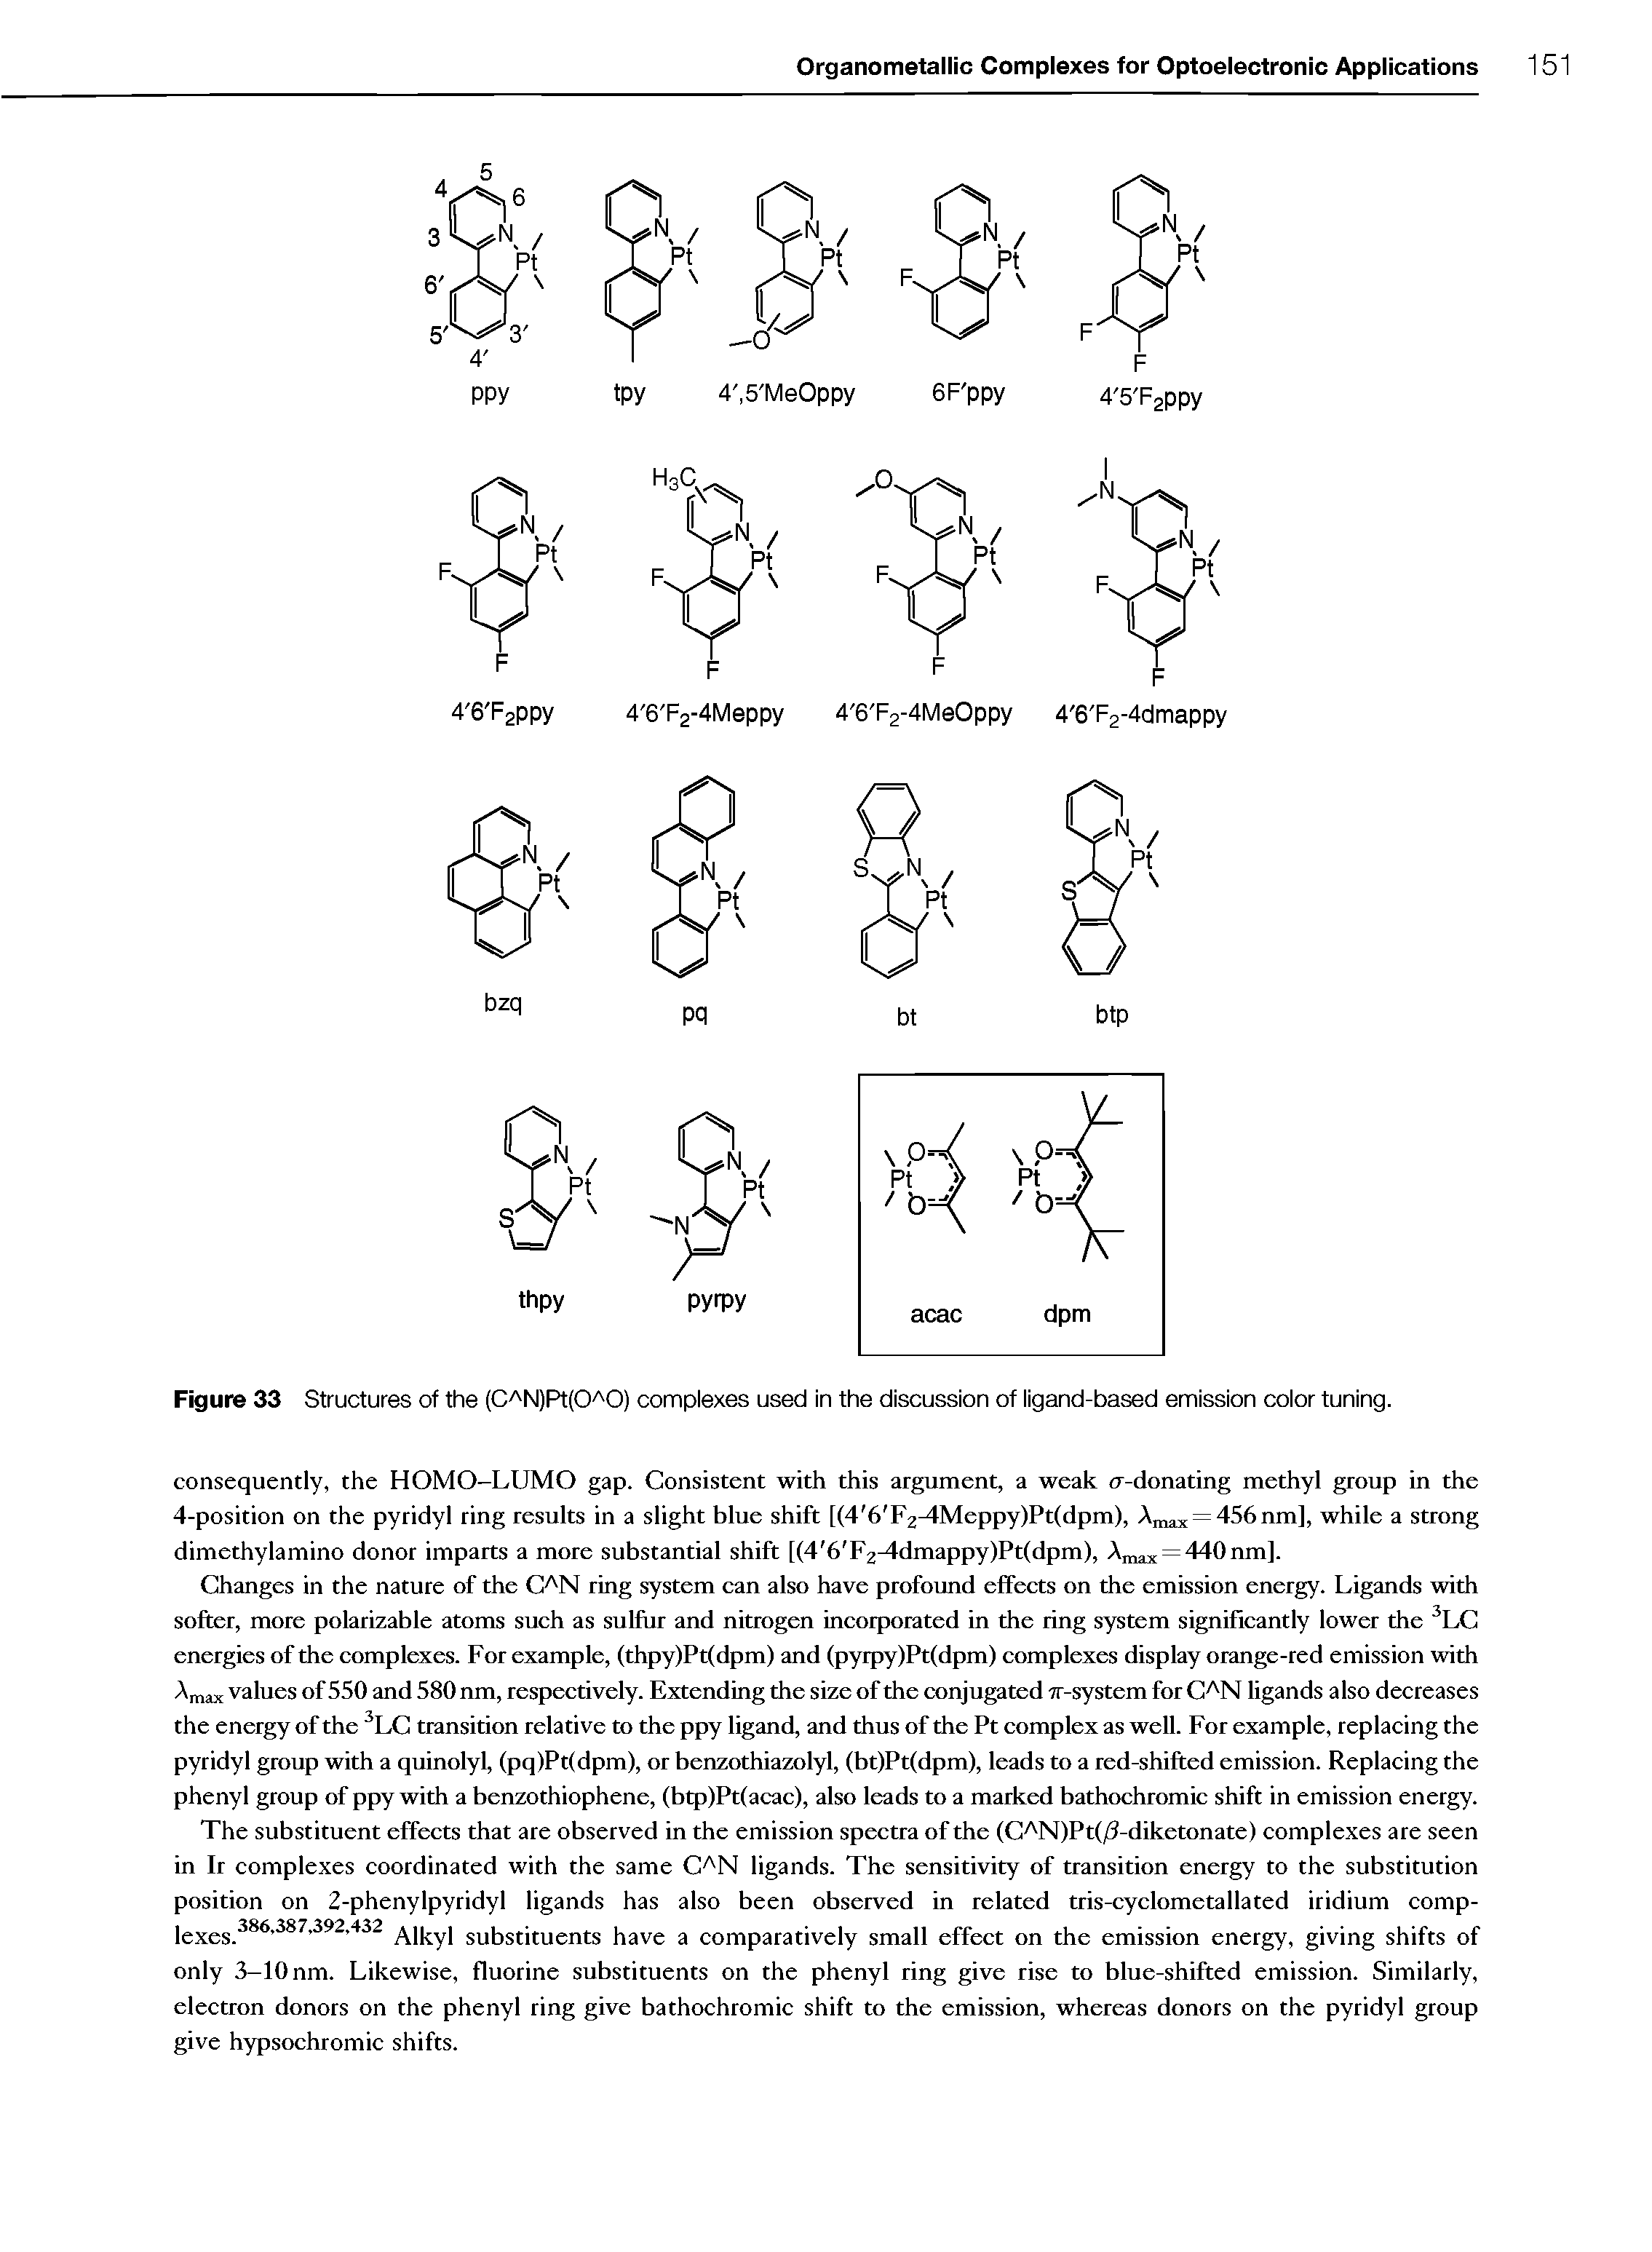 Figure 33 Structures of the (C N)R(O O) complexes used in the discussion of ligand-based emission color tuning.